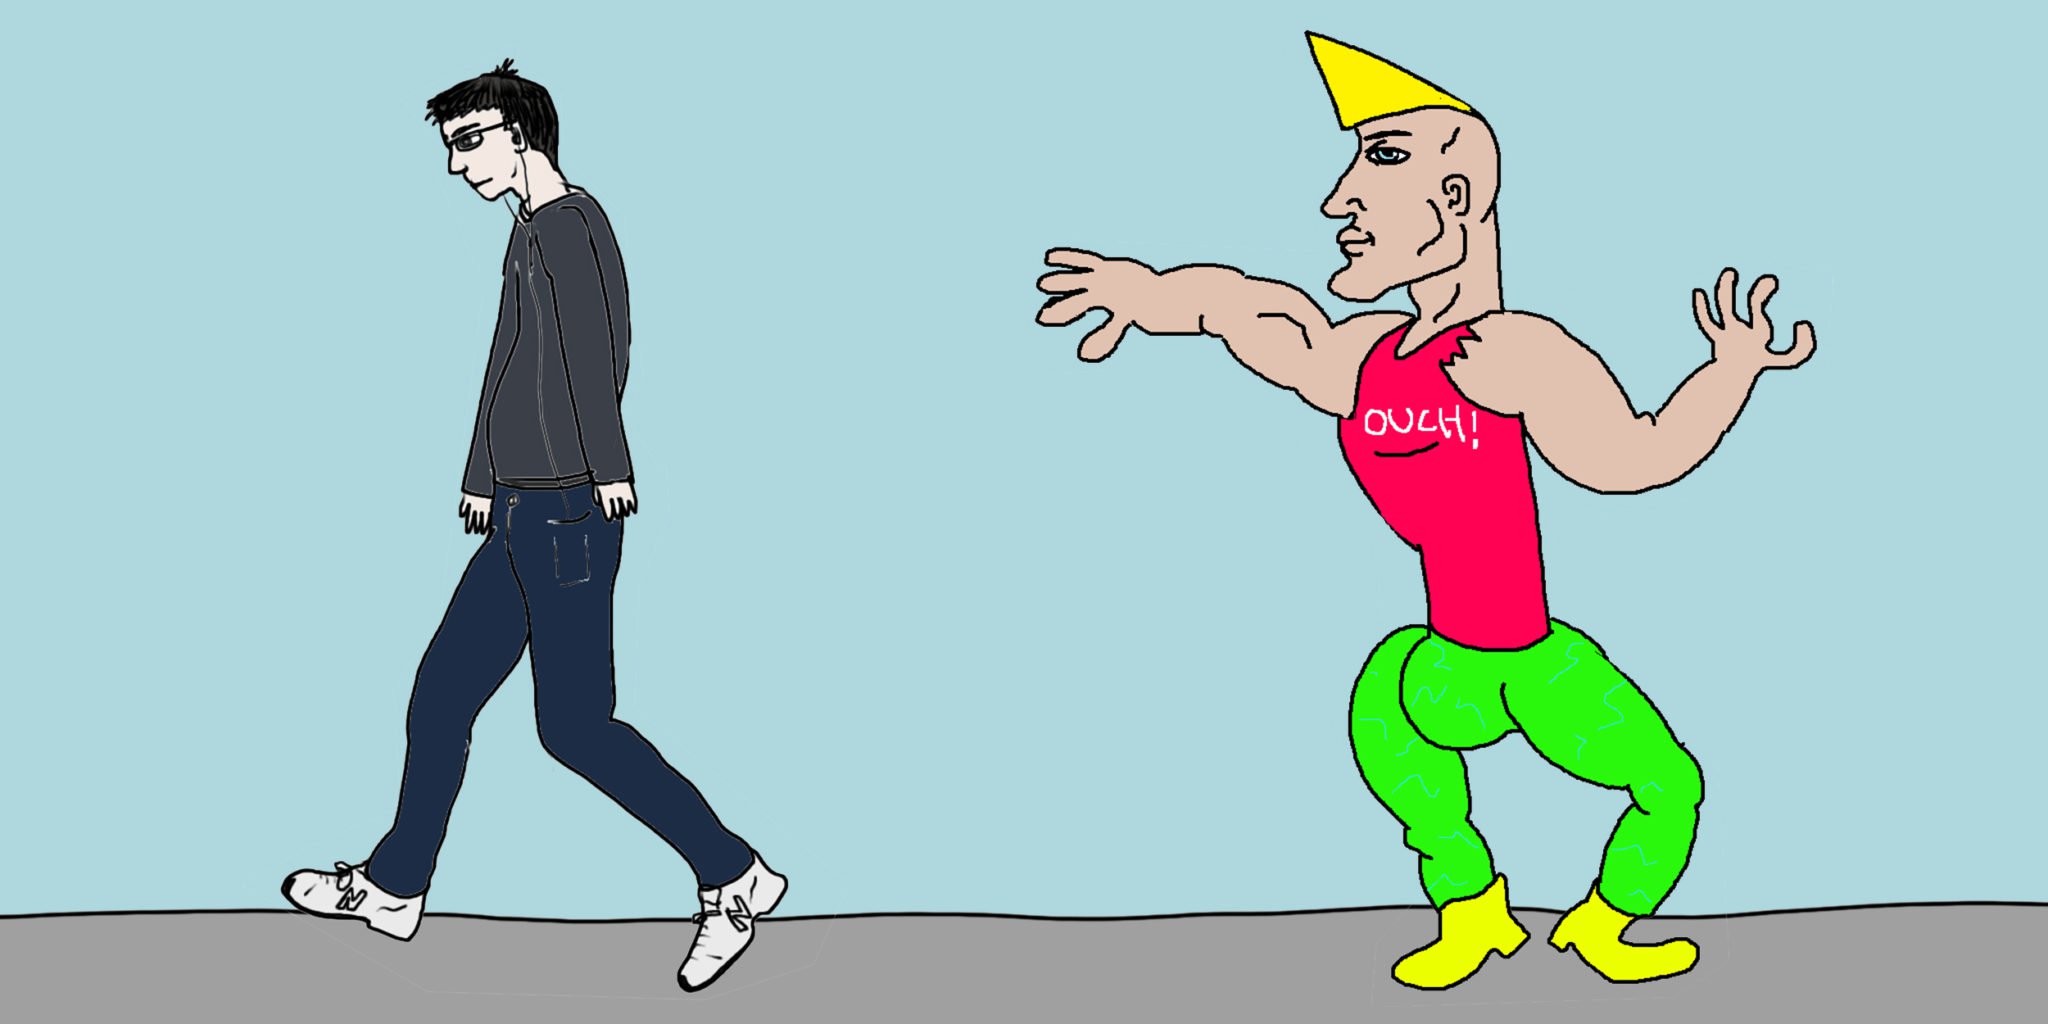 Popular incel Memes (left to right): Virgin, Chad, Becky and Stacy. The